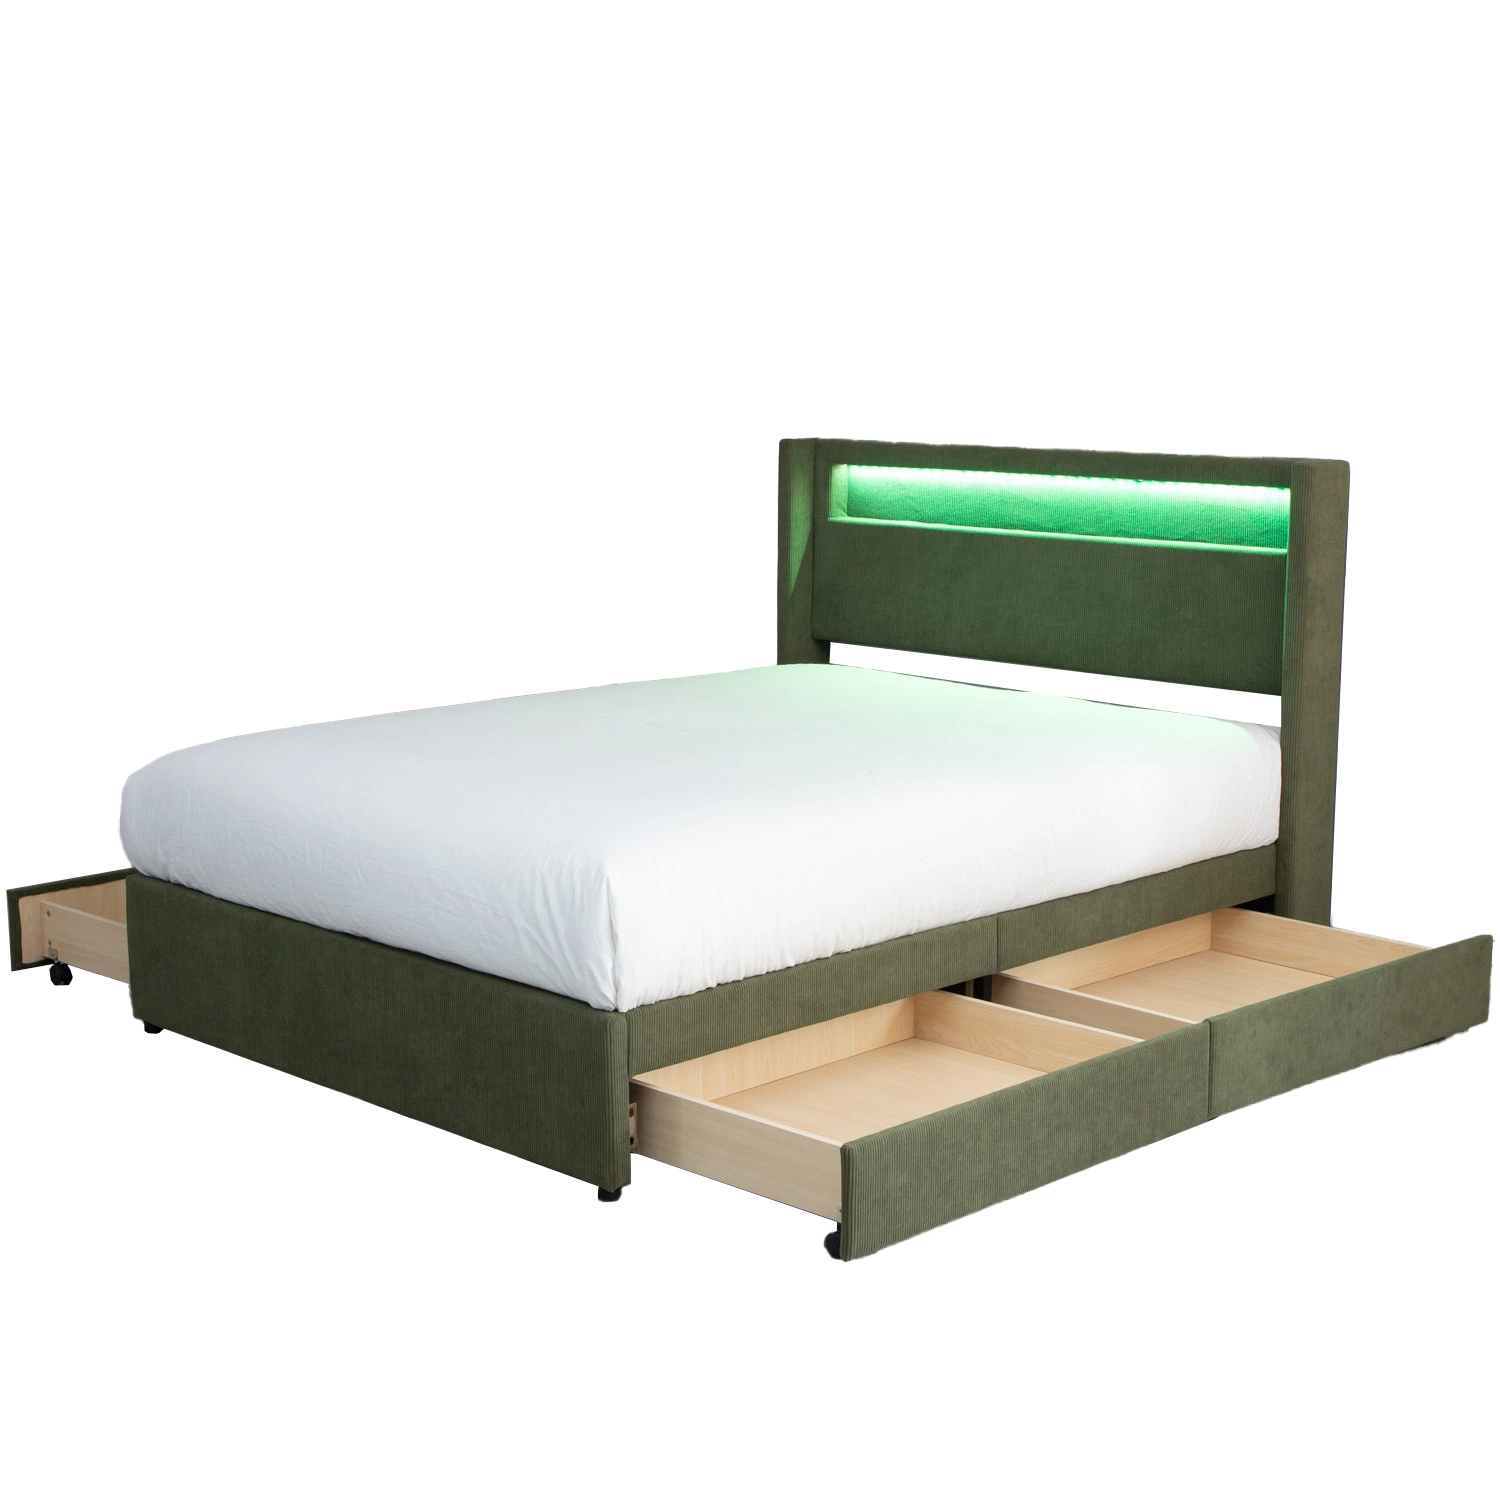 Huayang Home Furniture Storage Bed LED Queen Beds with Drawers Bedroom Bed Bedroom Furniture SGS Factory Certification